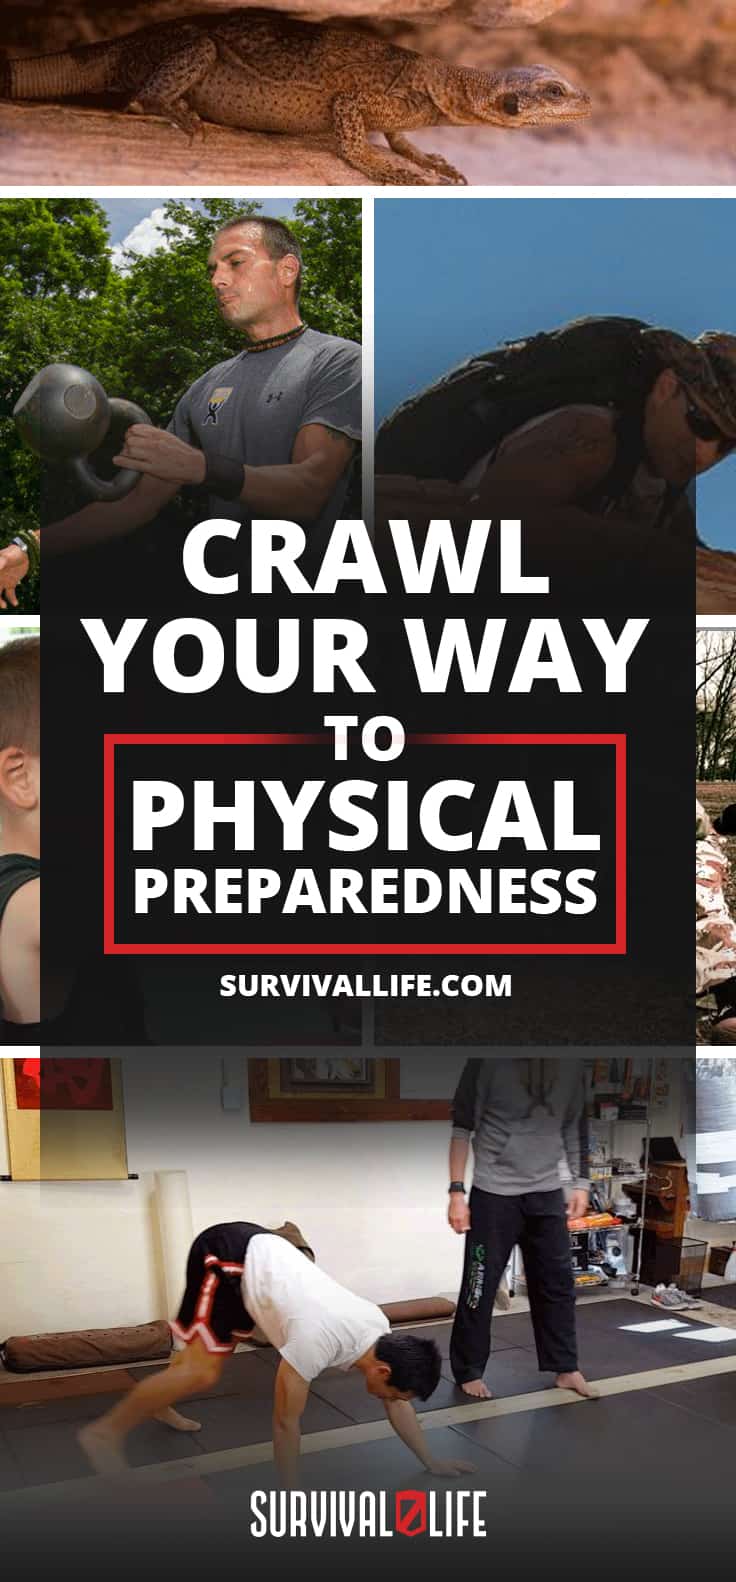 Crawl Your Way To Physical Preparedness [Survival Life]